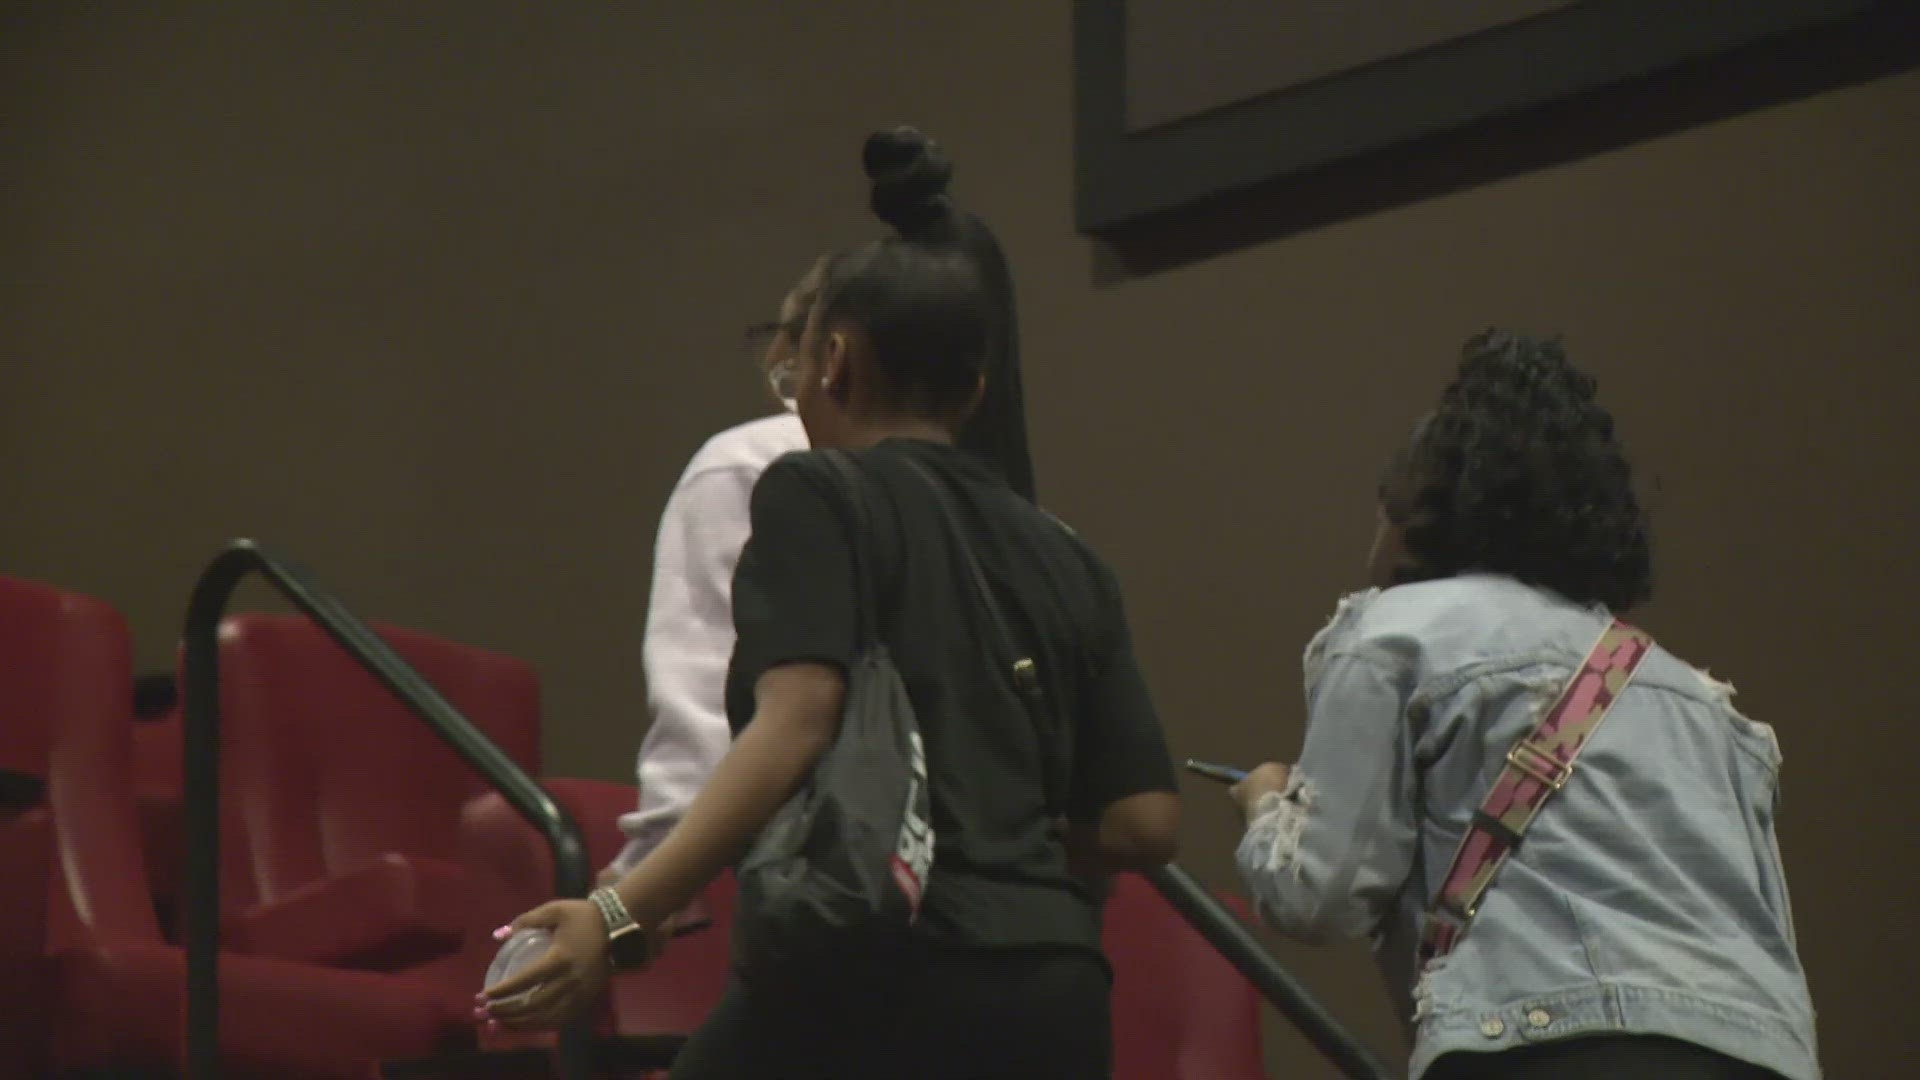 Organizers are hoping to keep students safe during the break.